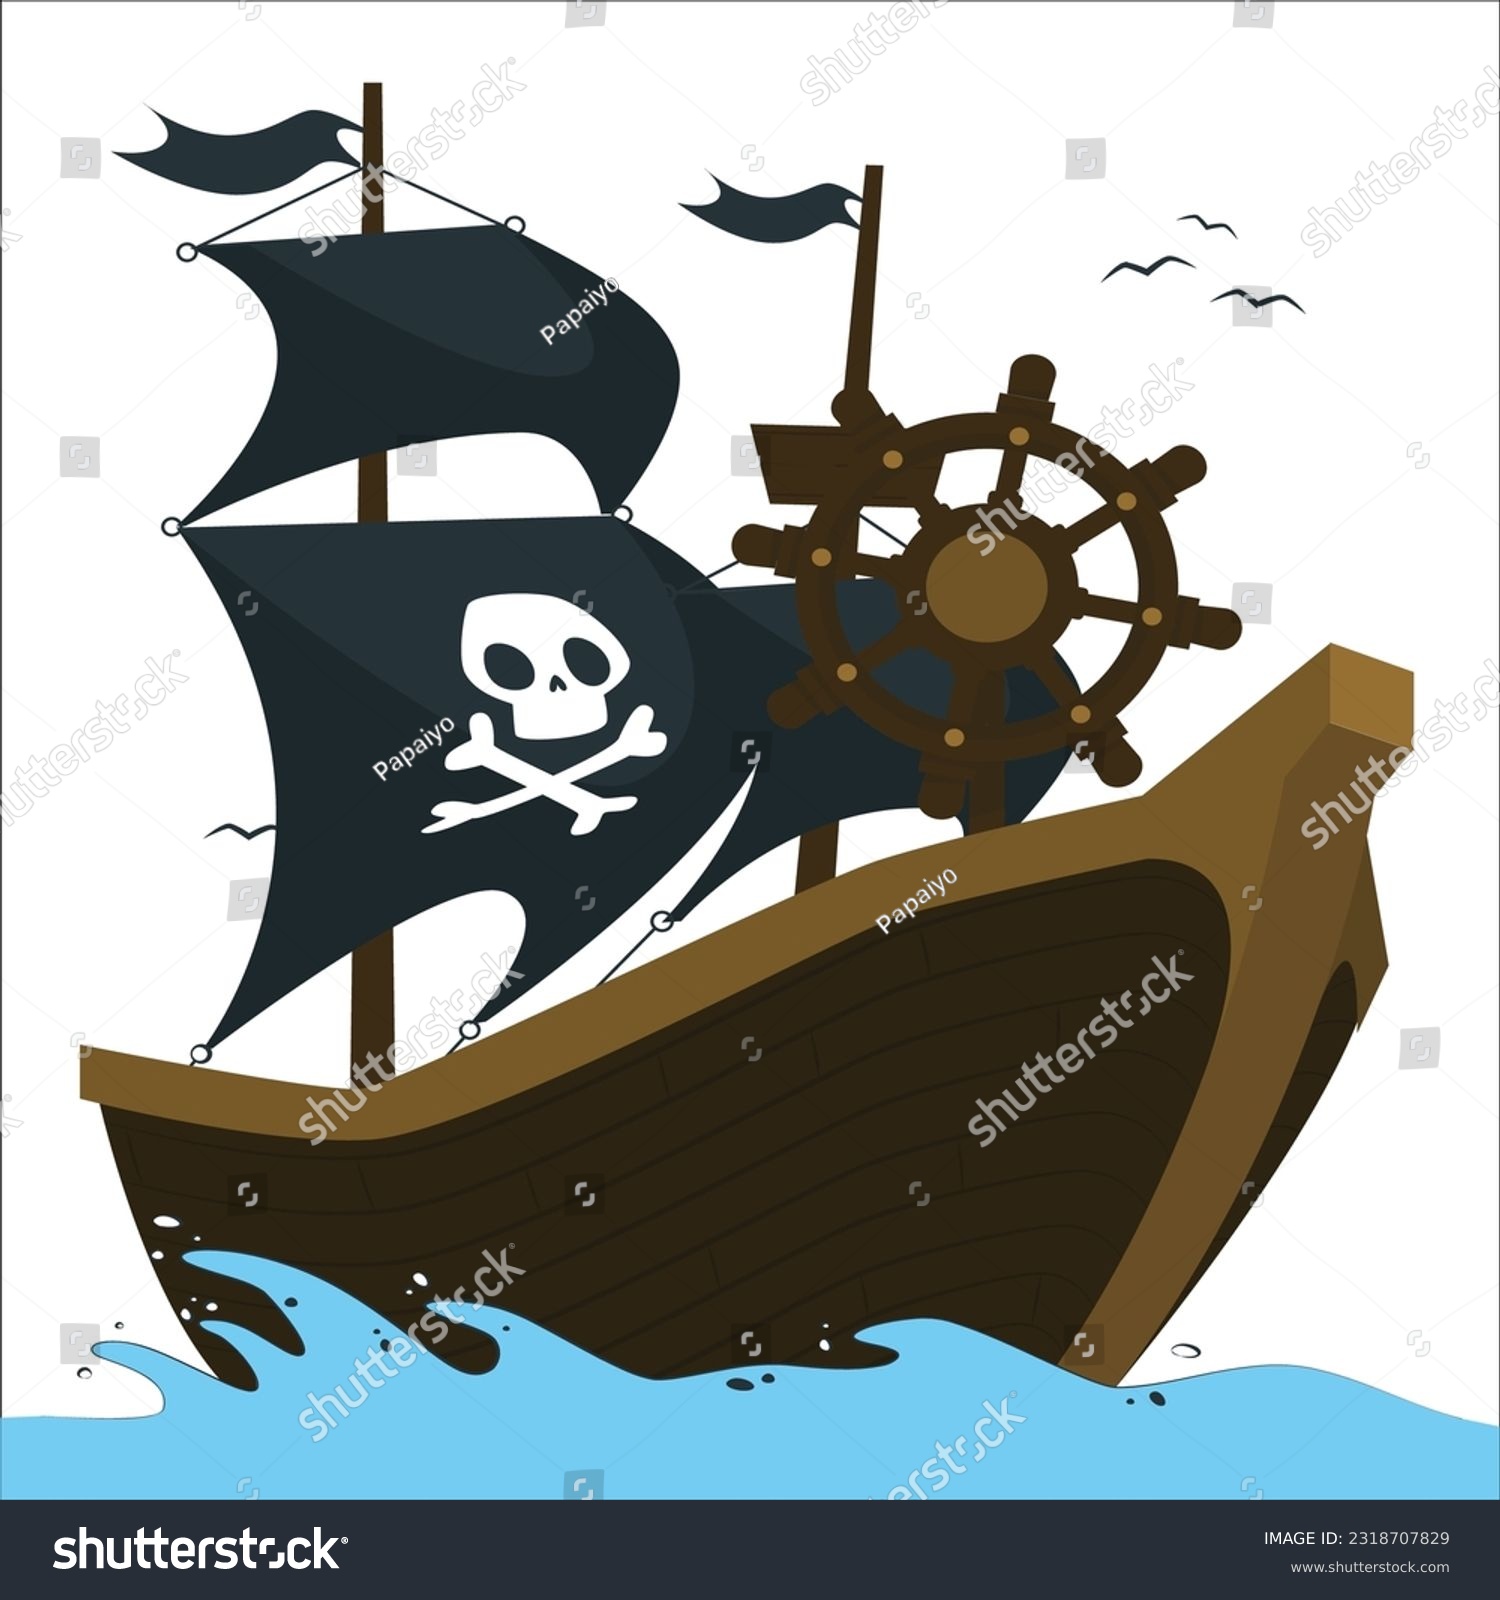 SVG of Vector cartoon pirate ship on water, sand beach of the bay. Wooden boat with black sails, cannons goes to the island. Corvette or frigate with skull and bones flag at sea, ocean. Old battleship, barge svg